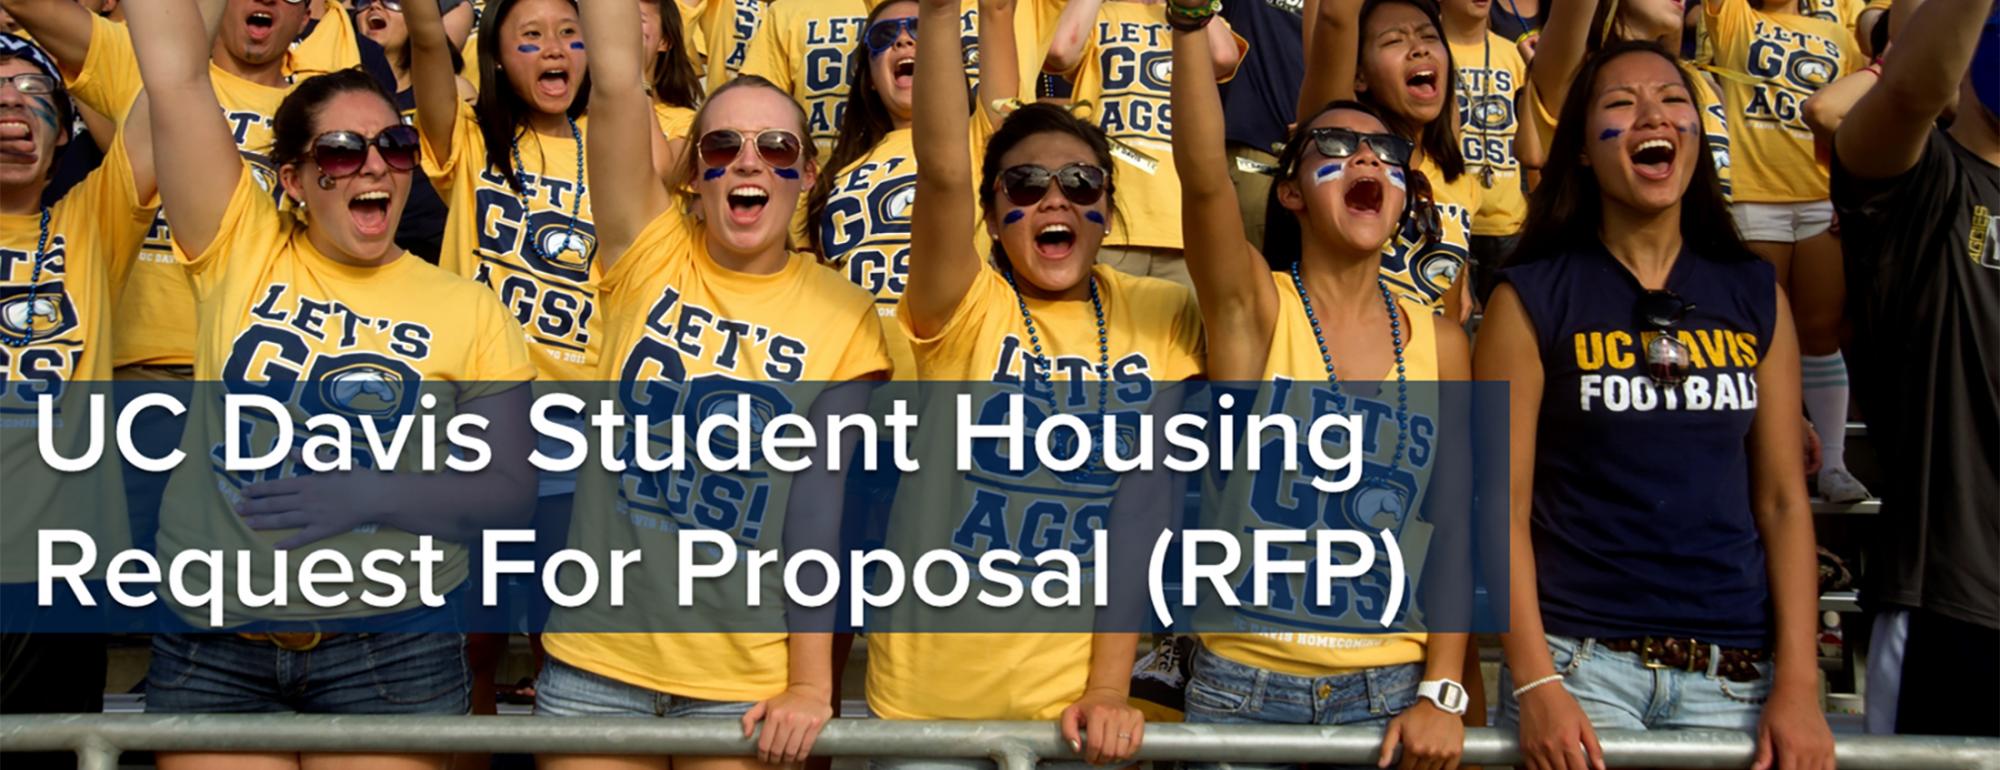 UC Davis Student Housing Request for Proposal